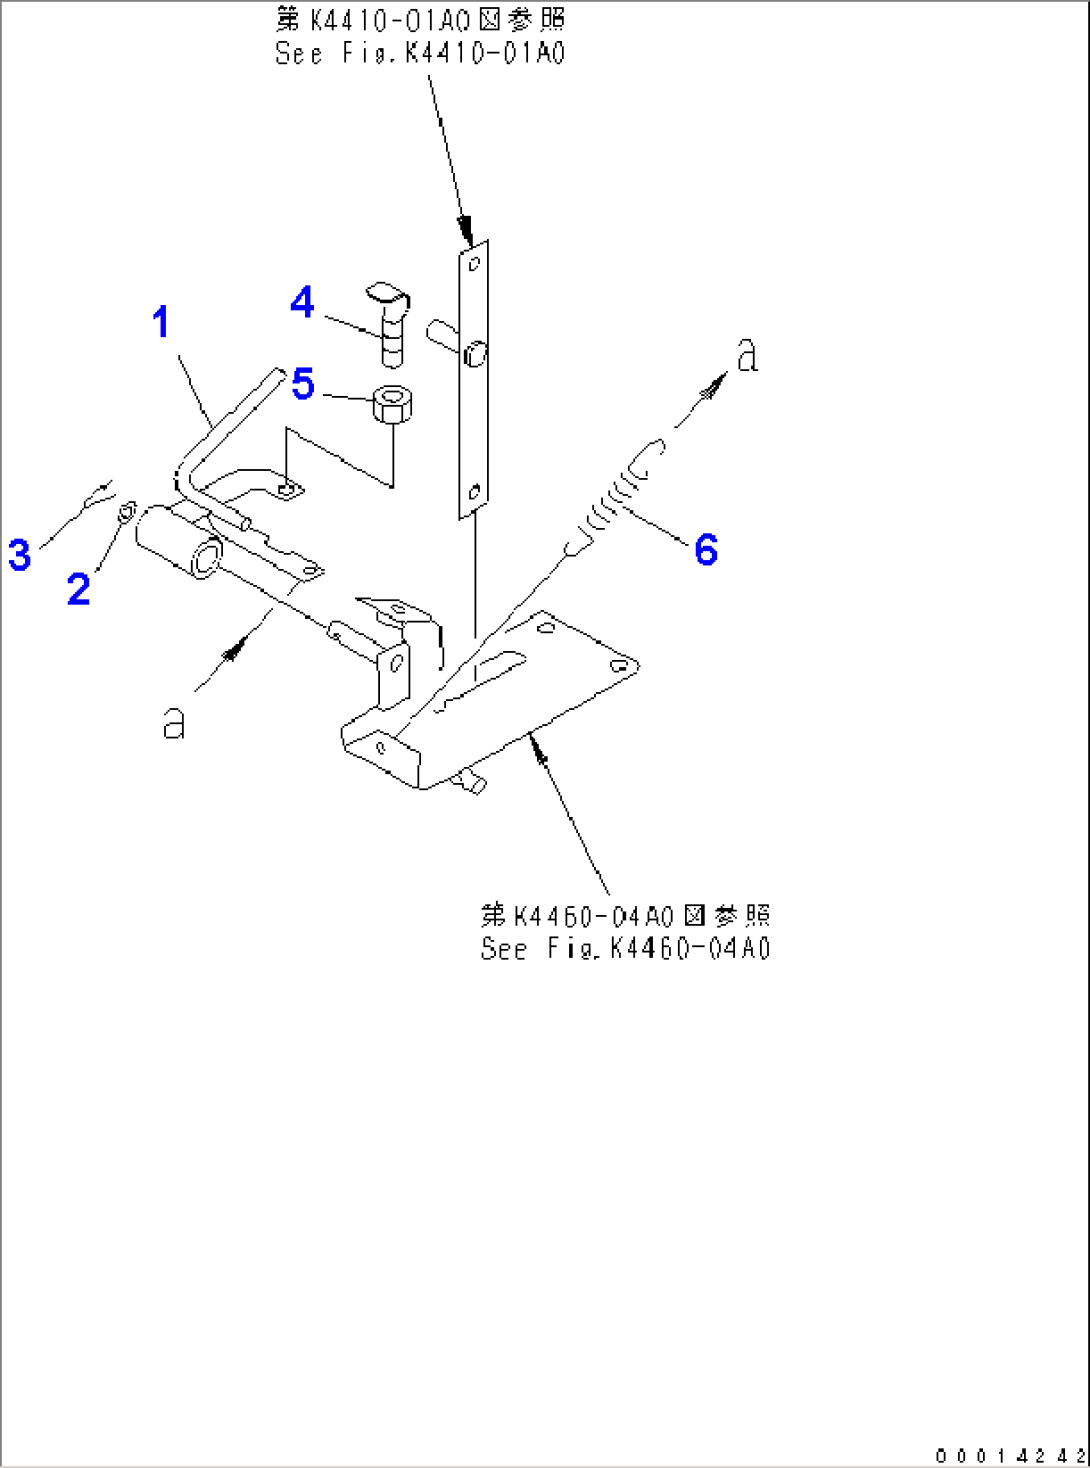 ACCELERATOR PEDAL AND LINKAGE (LEVER) (FOR HEATER)